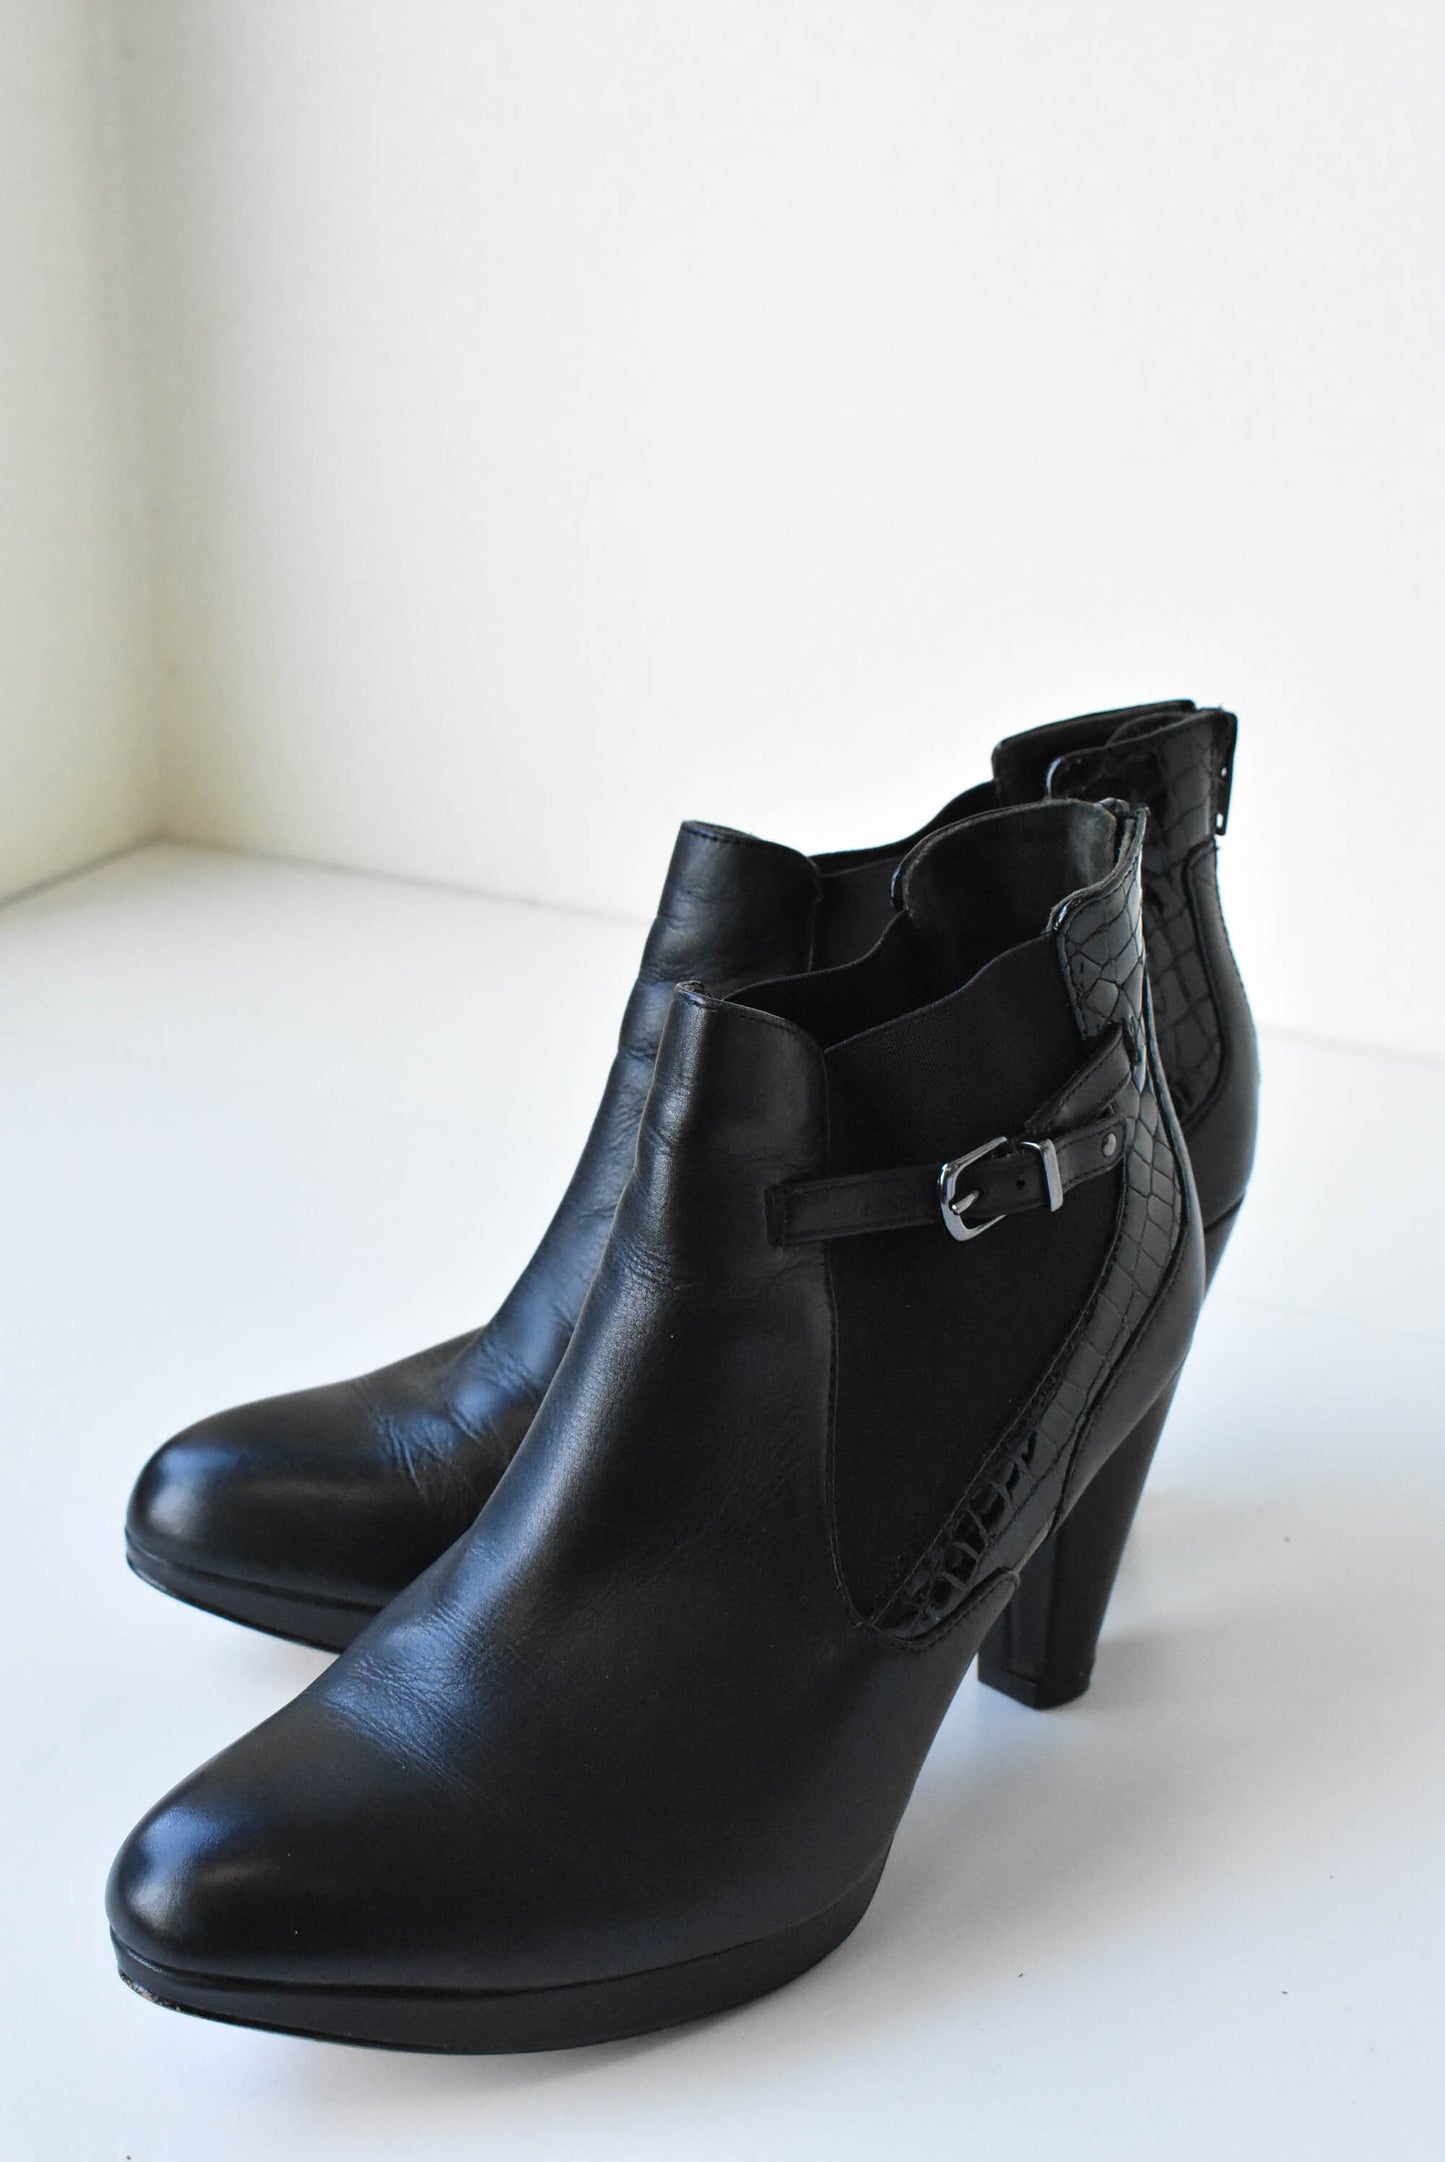 Ziera leather black scaled ankle boot heels, size 39.5